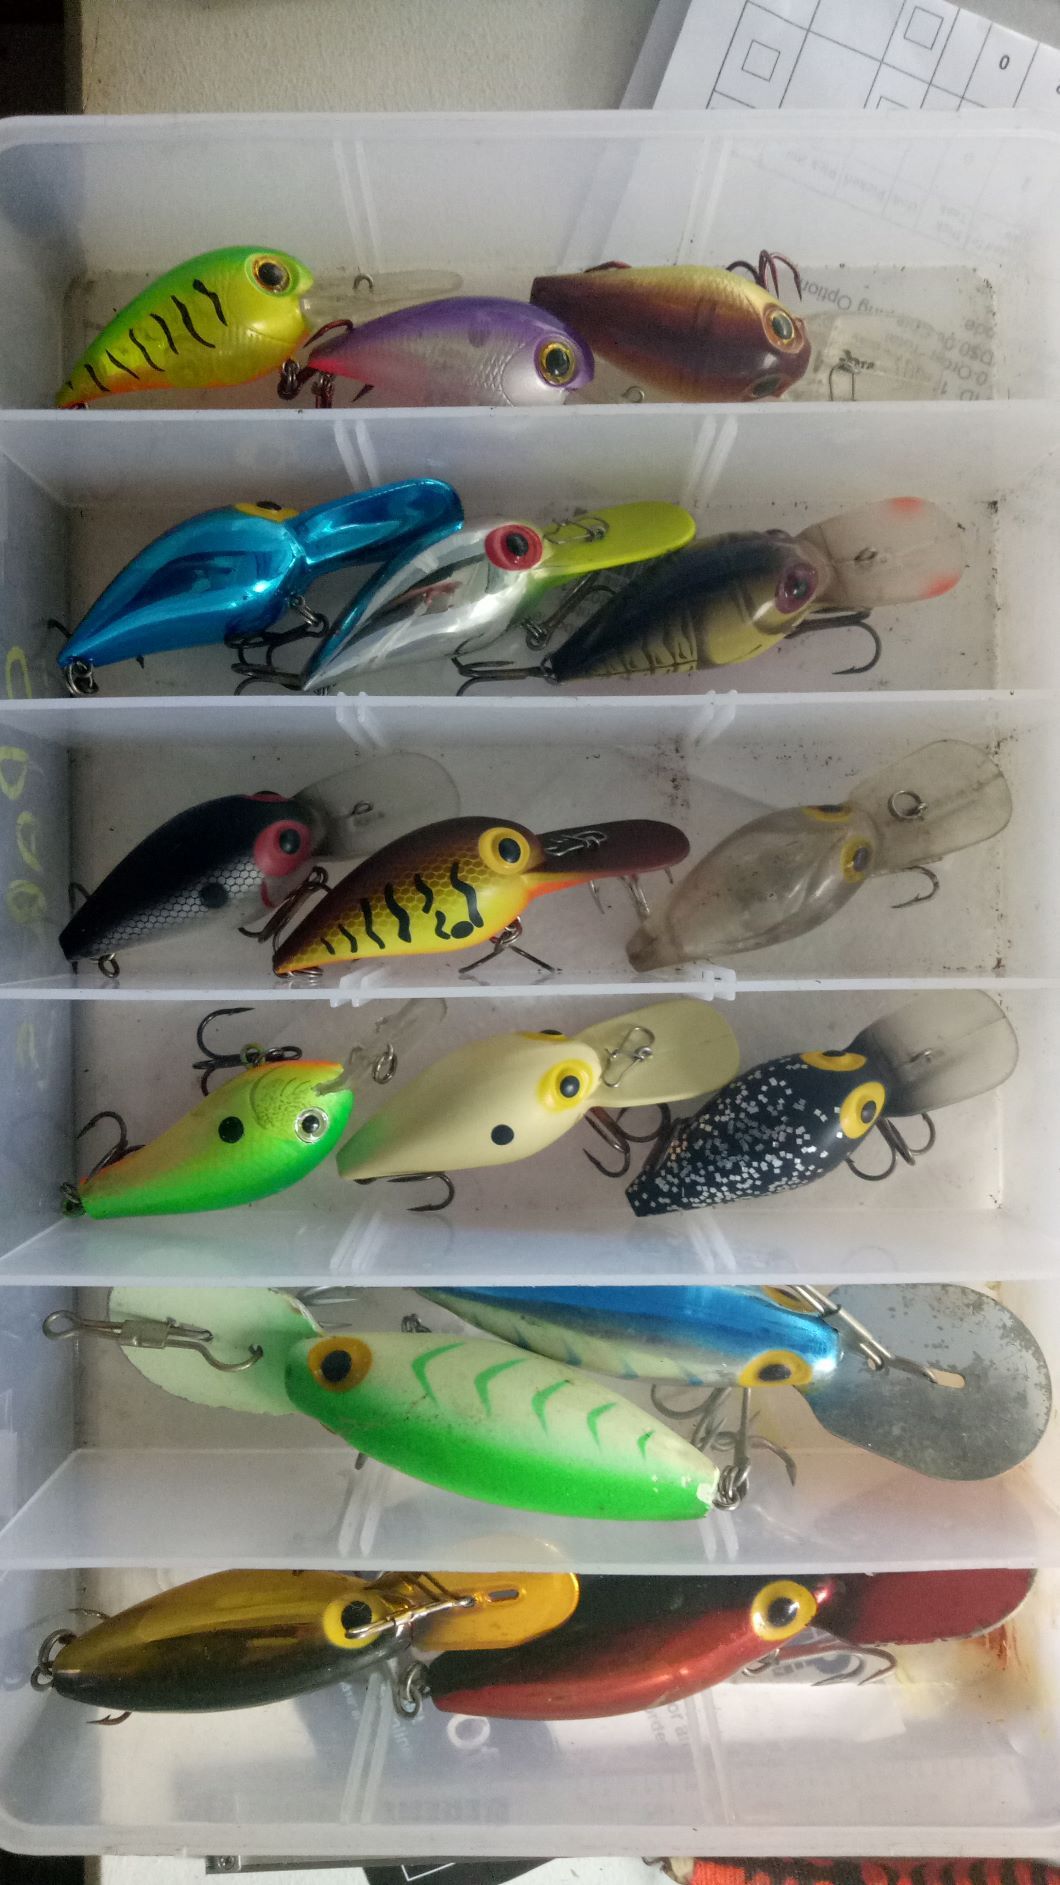 What types of lures would you use? - Fishing Chat - DECKEE Community